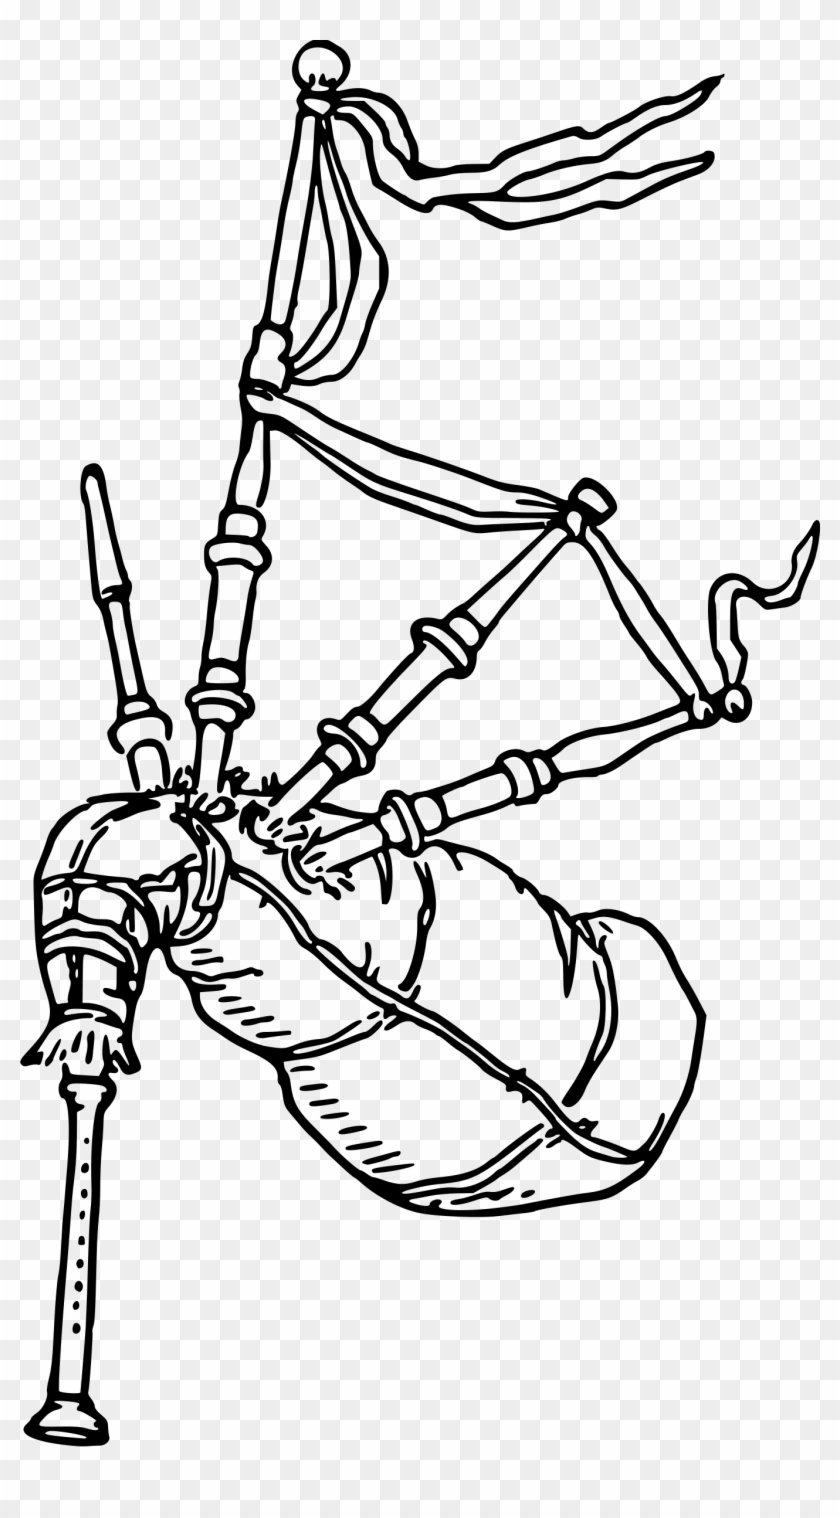 Bagpipe Clipart - Bagpipes Clip Art Black And White - Png Download #3277828